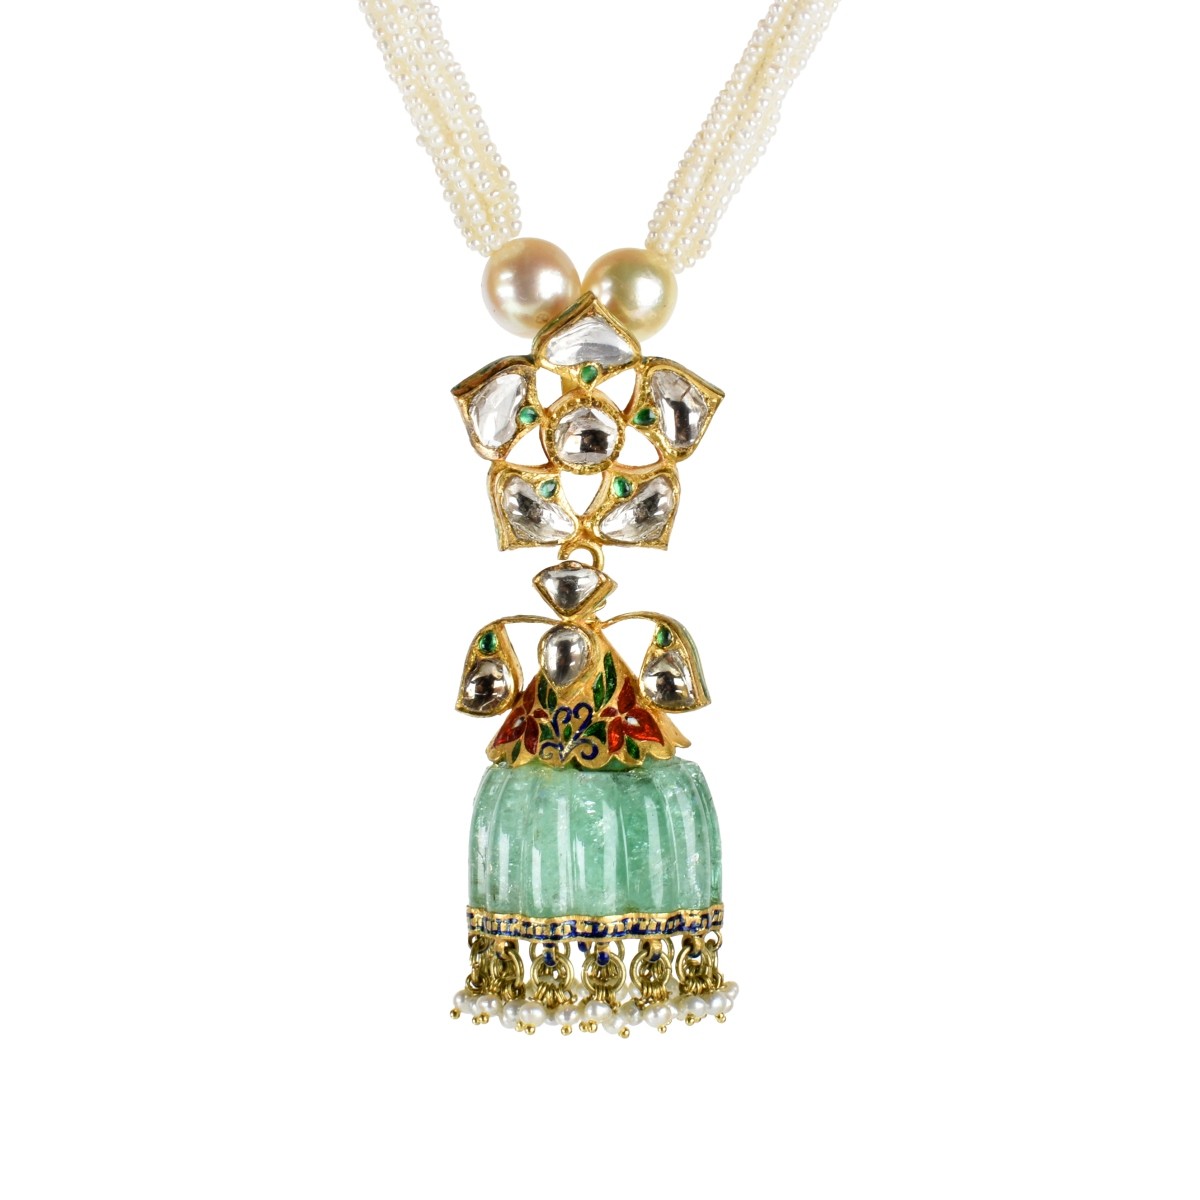 Indian Mughal style Necklace